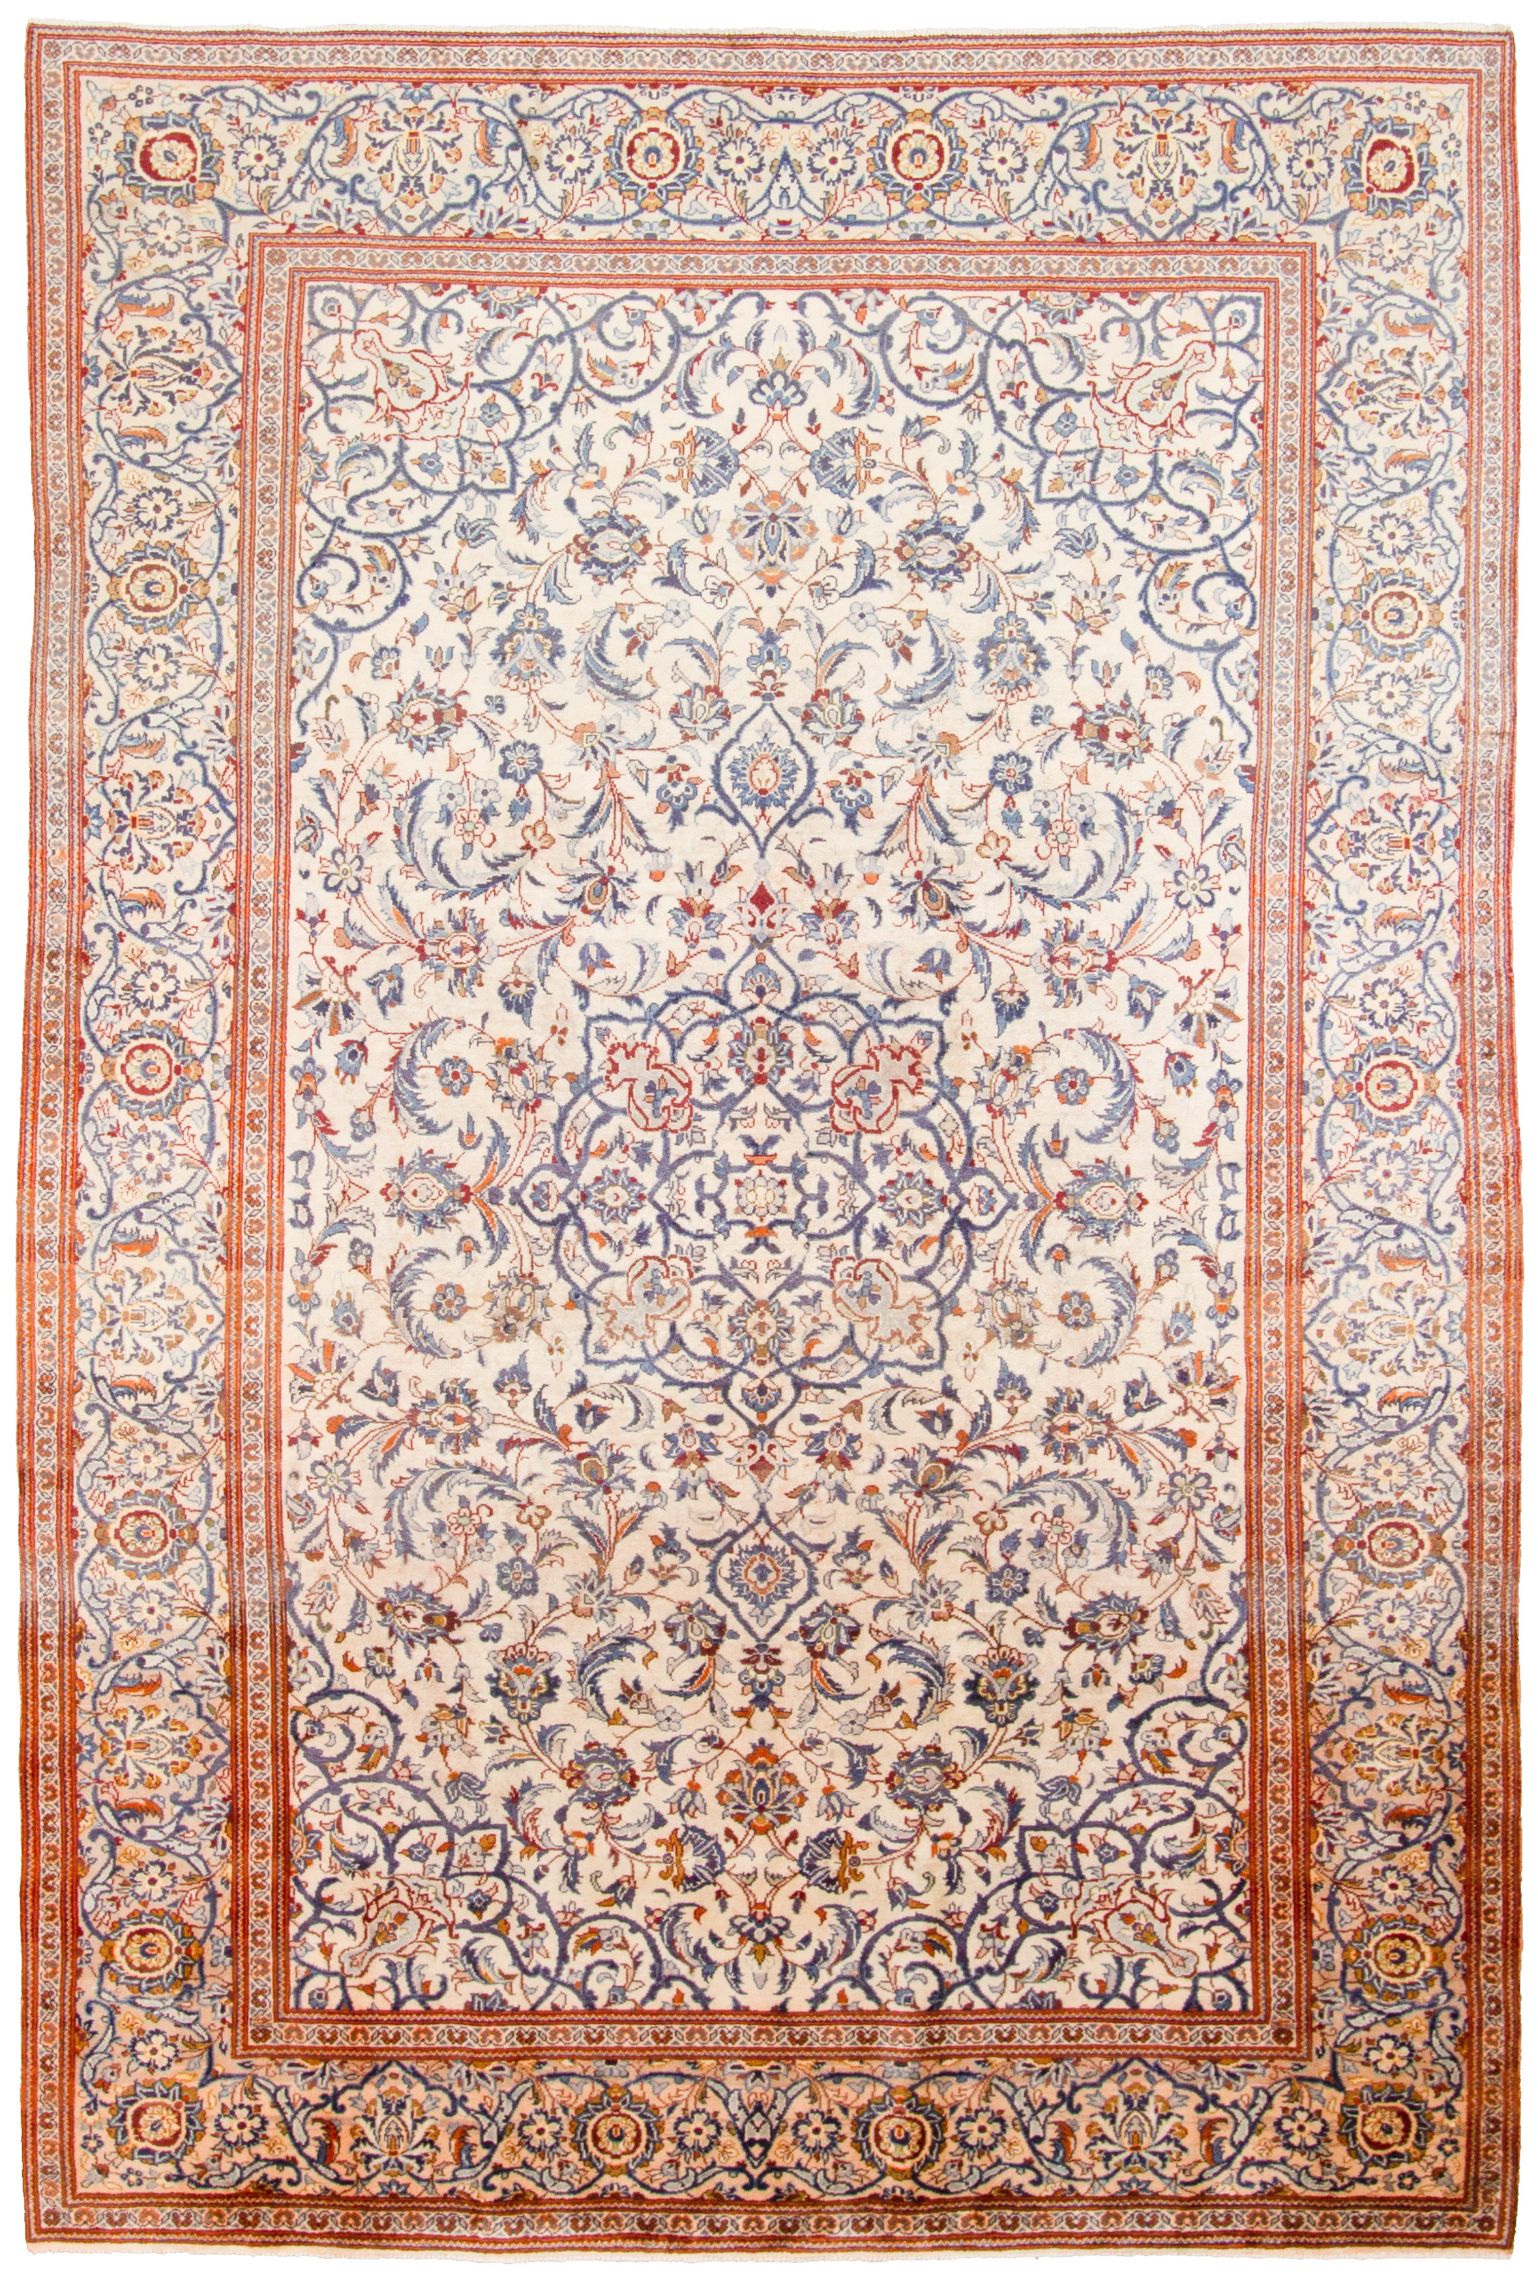 Hand-knotted Kashan  Wool Rug 7'11" x 12'1"  Size: 7'11" x 12'1"  